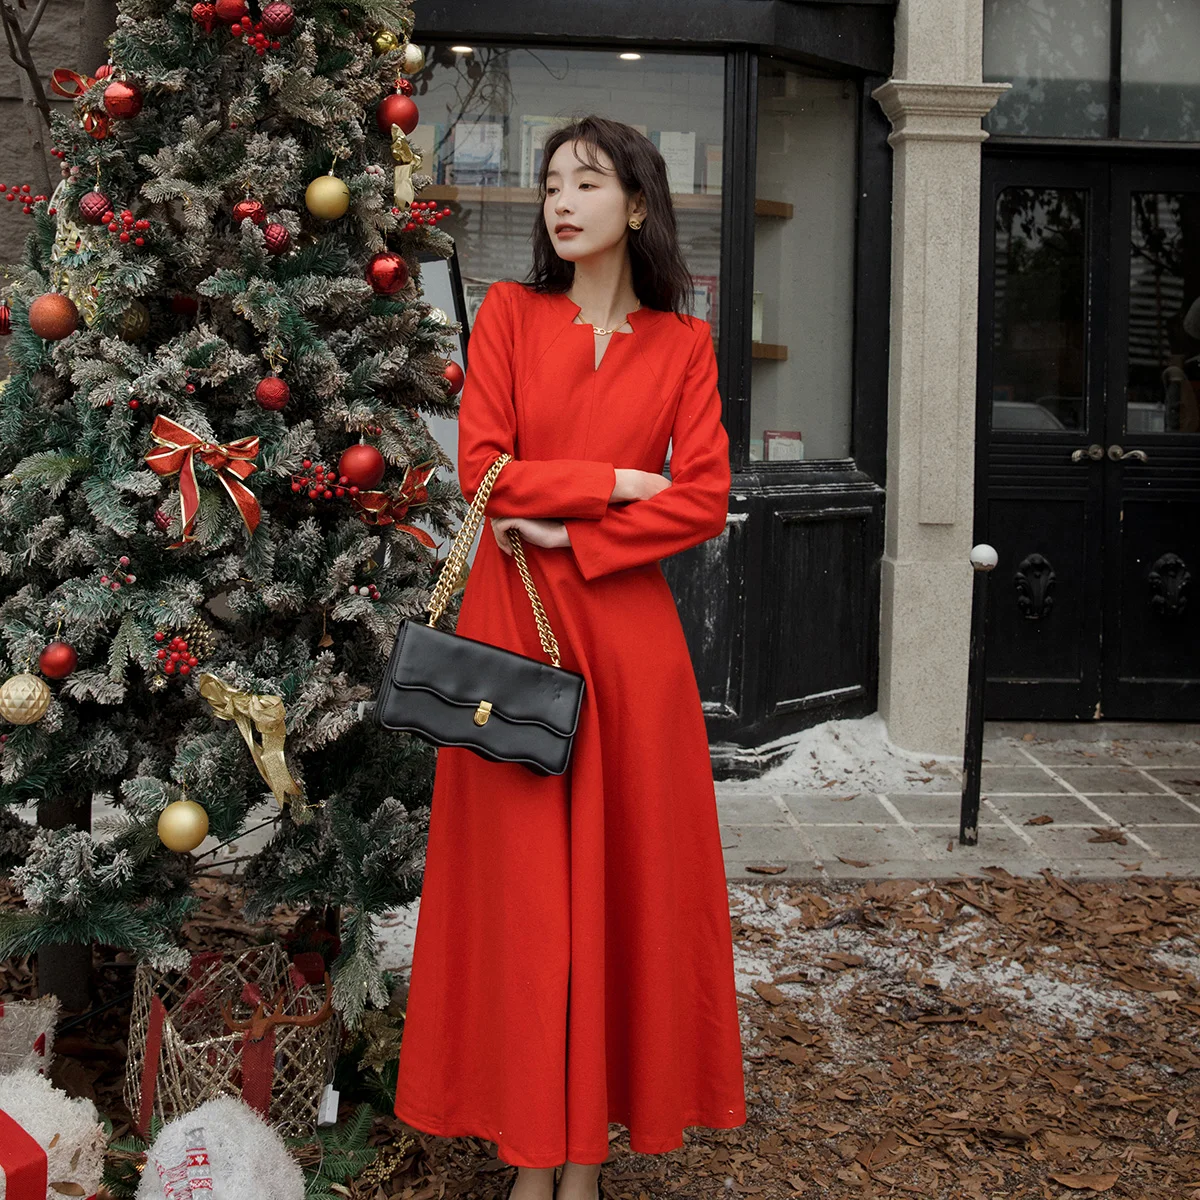 Wool Long Winter Dress Cashmere V-Neck Red Dress for Christmas New Year Runway Warm Snow Wear Maxi Evening Dress Ankle-Length